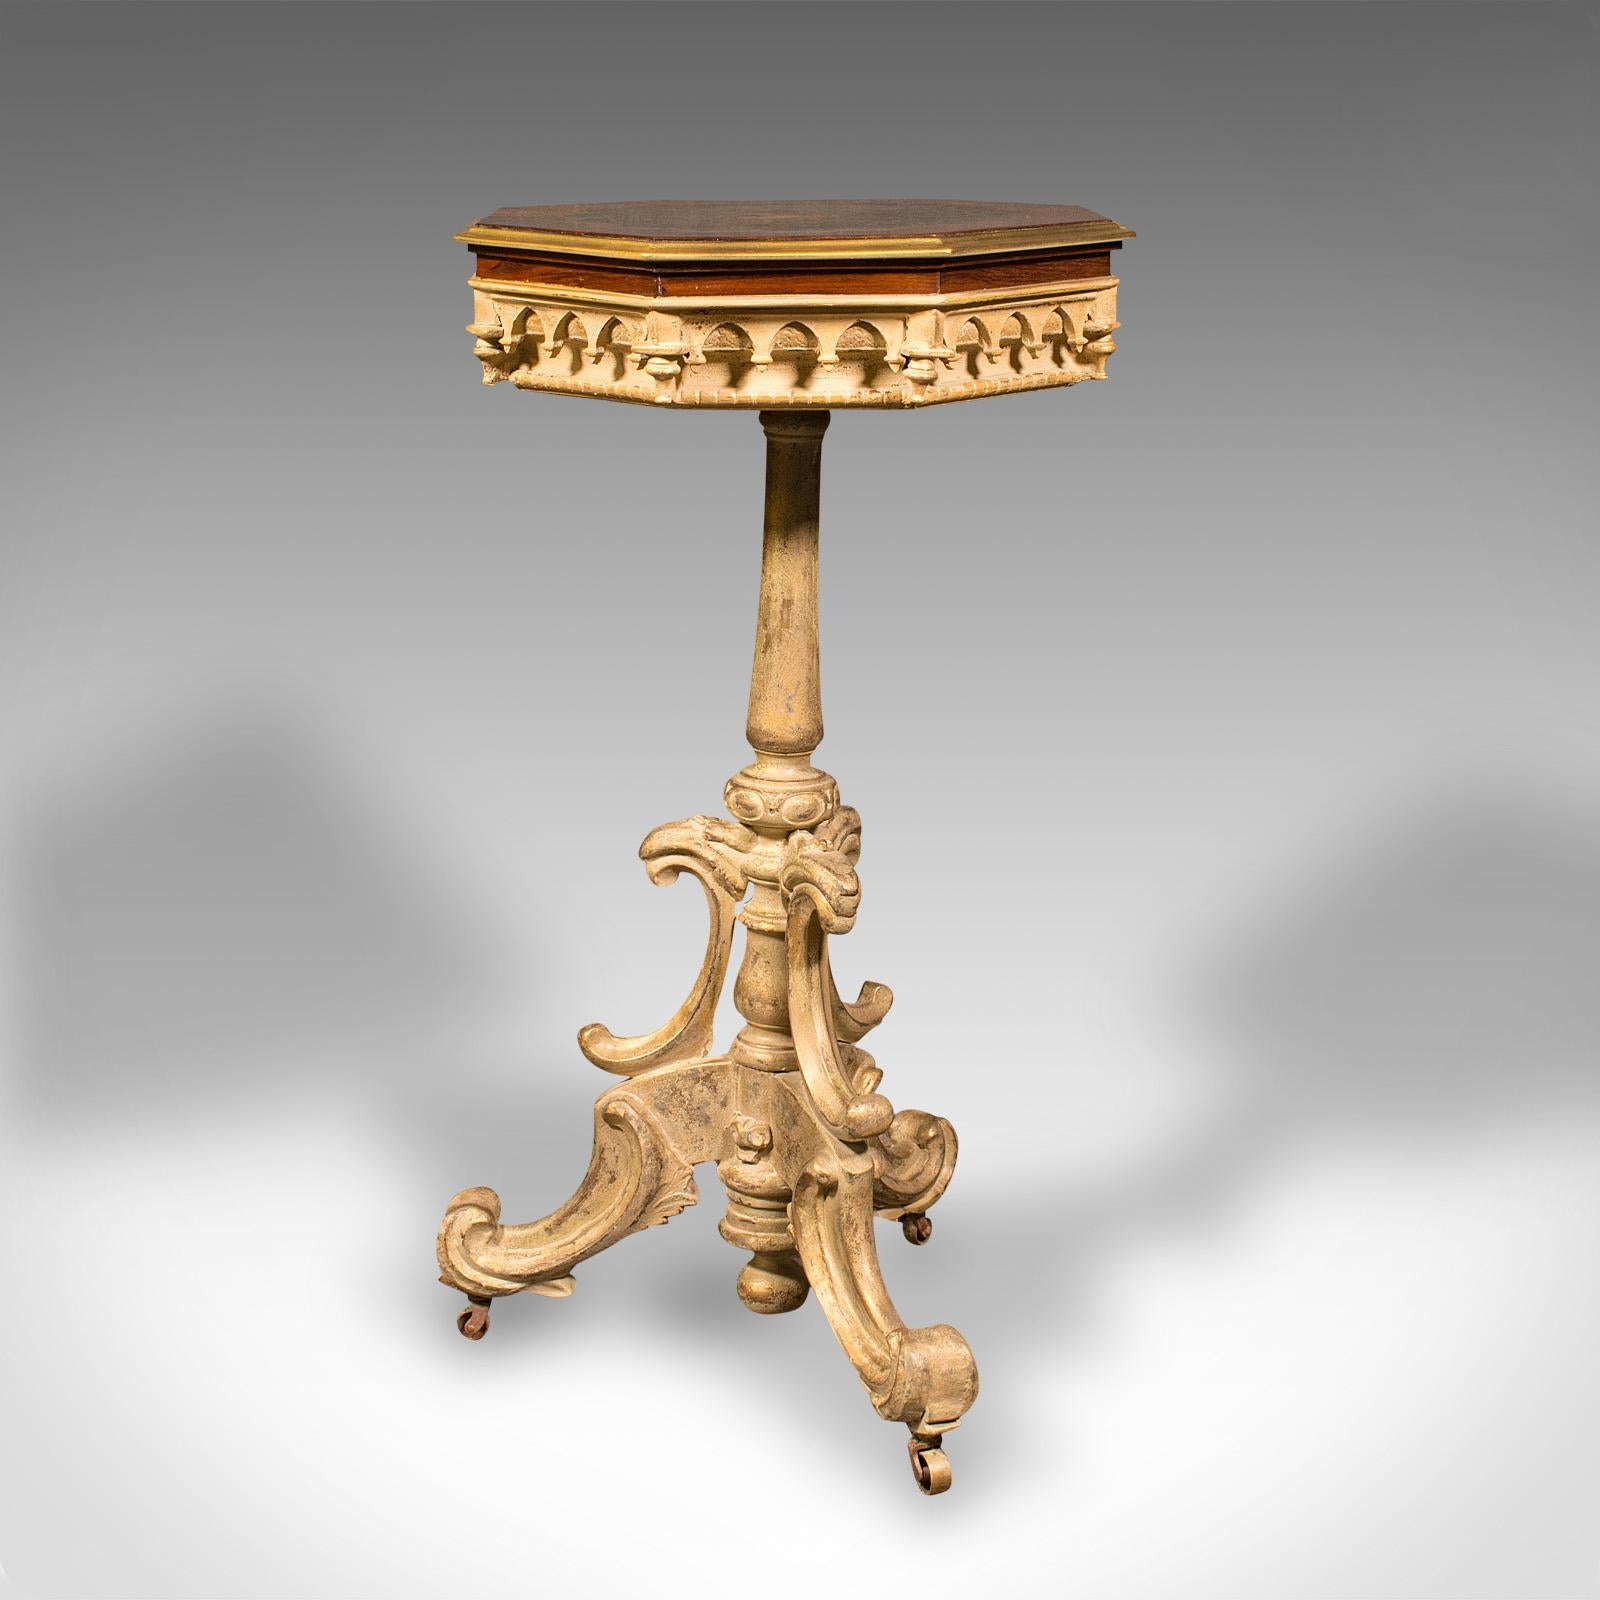 19th Century Antique Decorative Side Table, Continental, Lamp, Regency Revival, Victorian For Sale